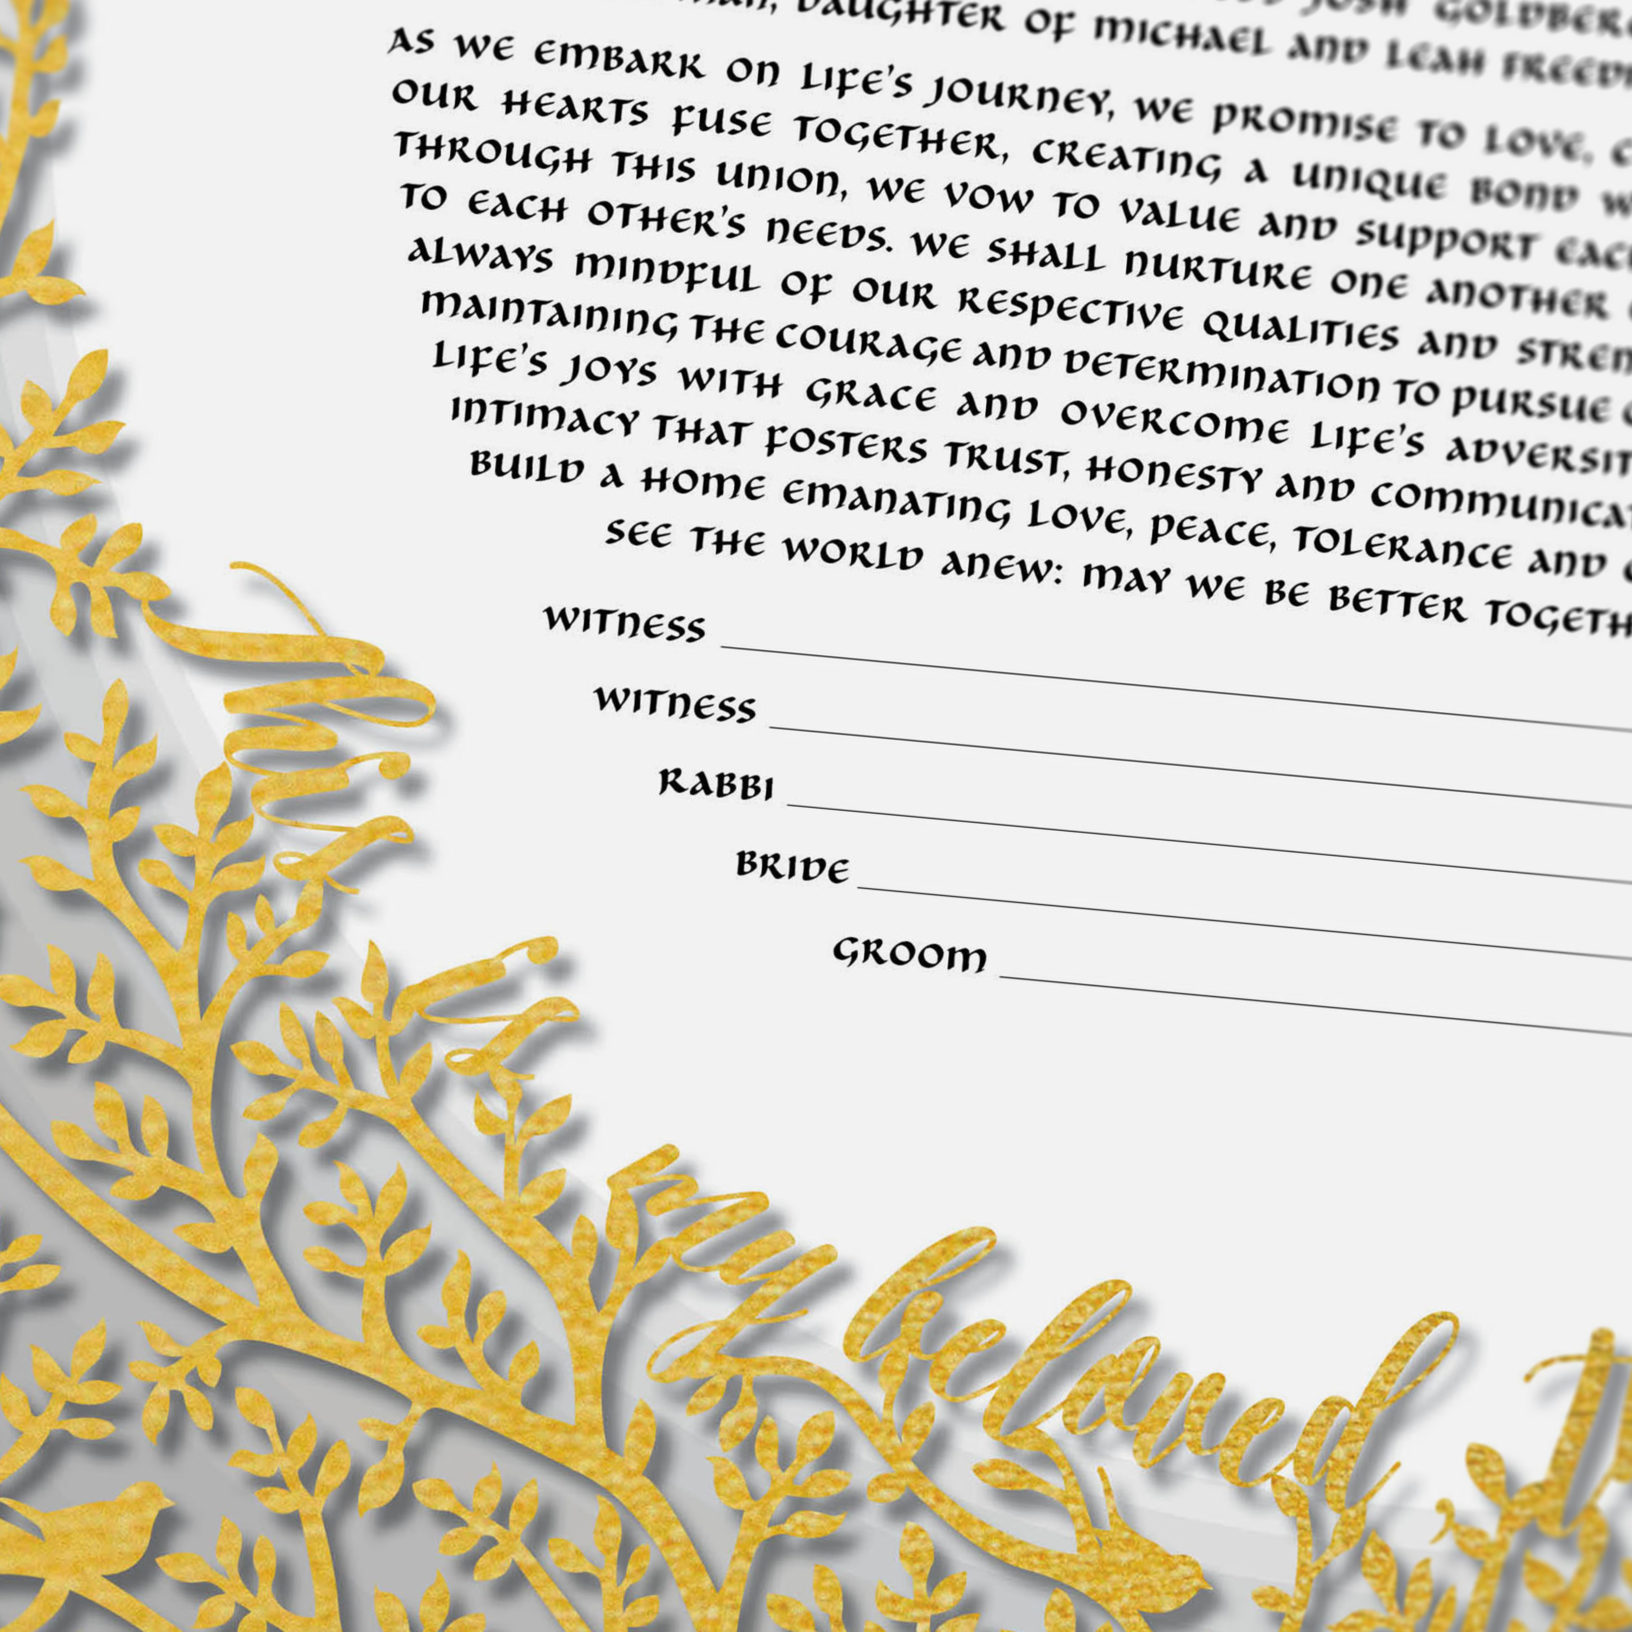 Lauren Rosenthal McManus Papercut Beloveds I Papercut Gold on Grayscale Fade Ketubah Marriage Contracts